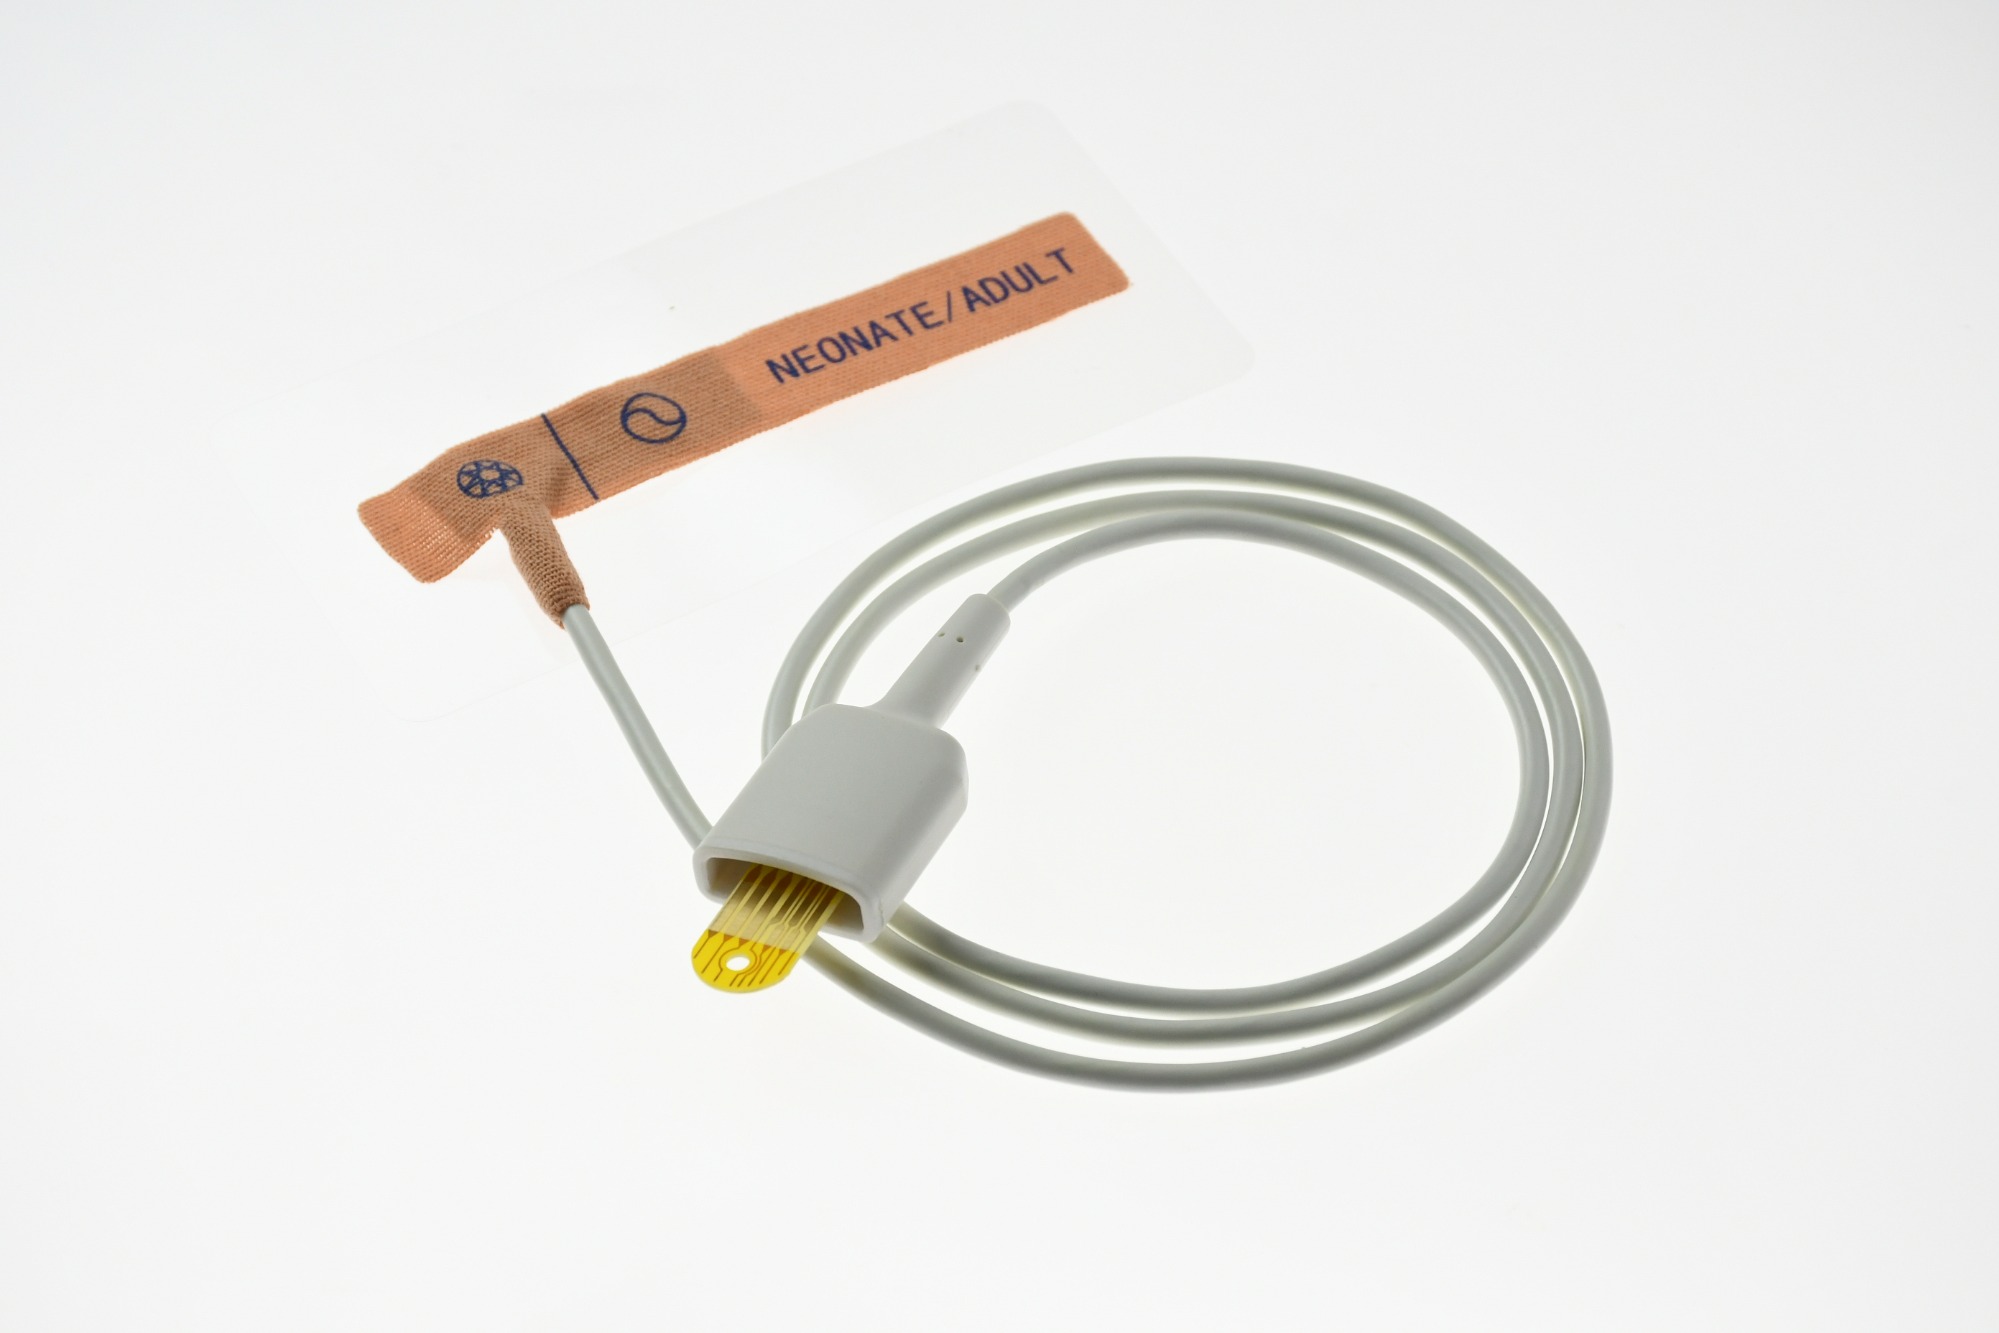 Massimo 8 Pin With Chip ( Duck Tongue) Bandage Adhesive Disposable SpO2 Sensor For Neonate And Adult Size Patient Monitor